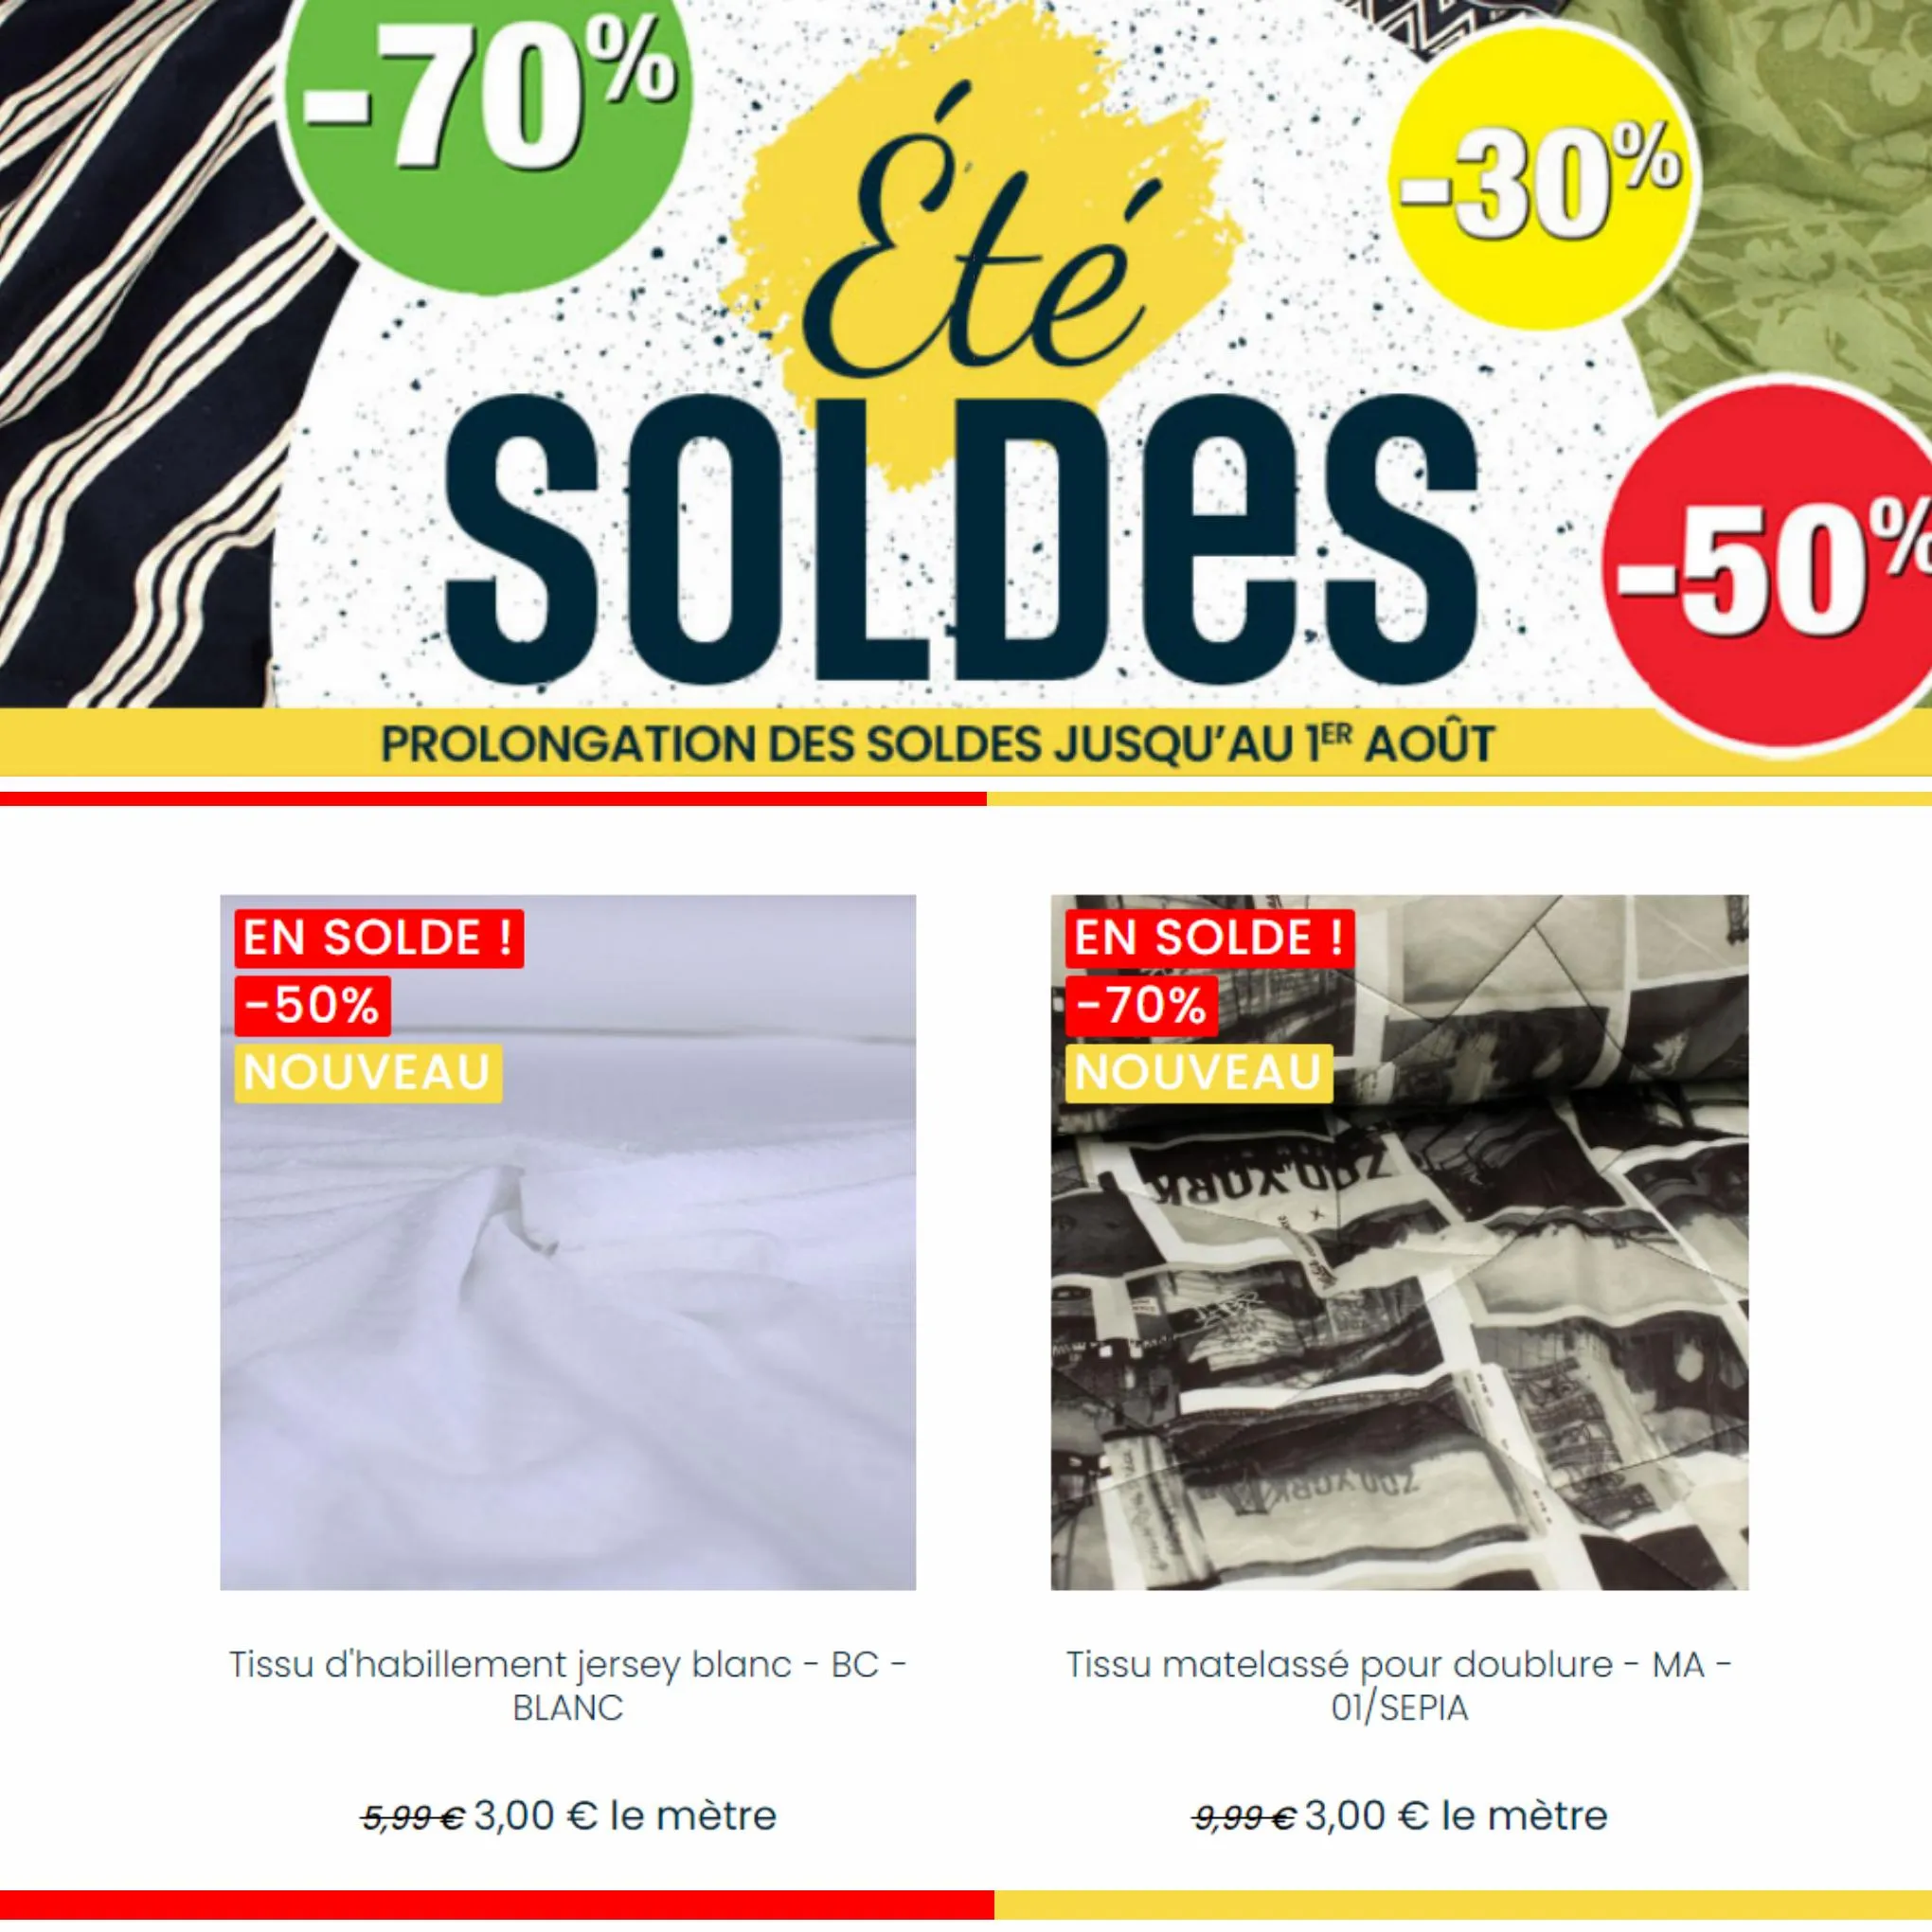 Catalogue Toto Soldes, page 00006